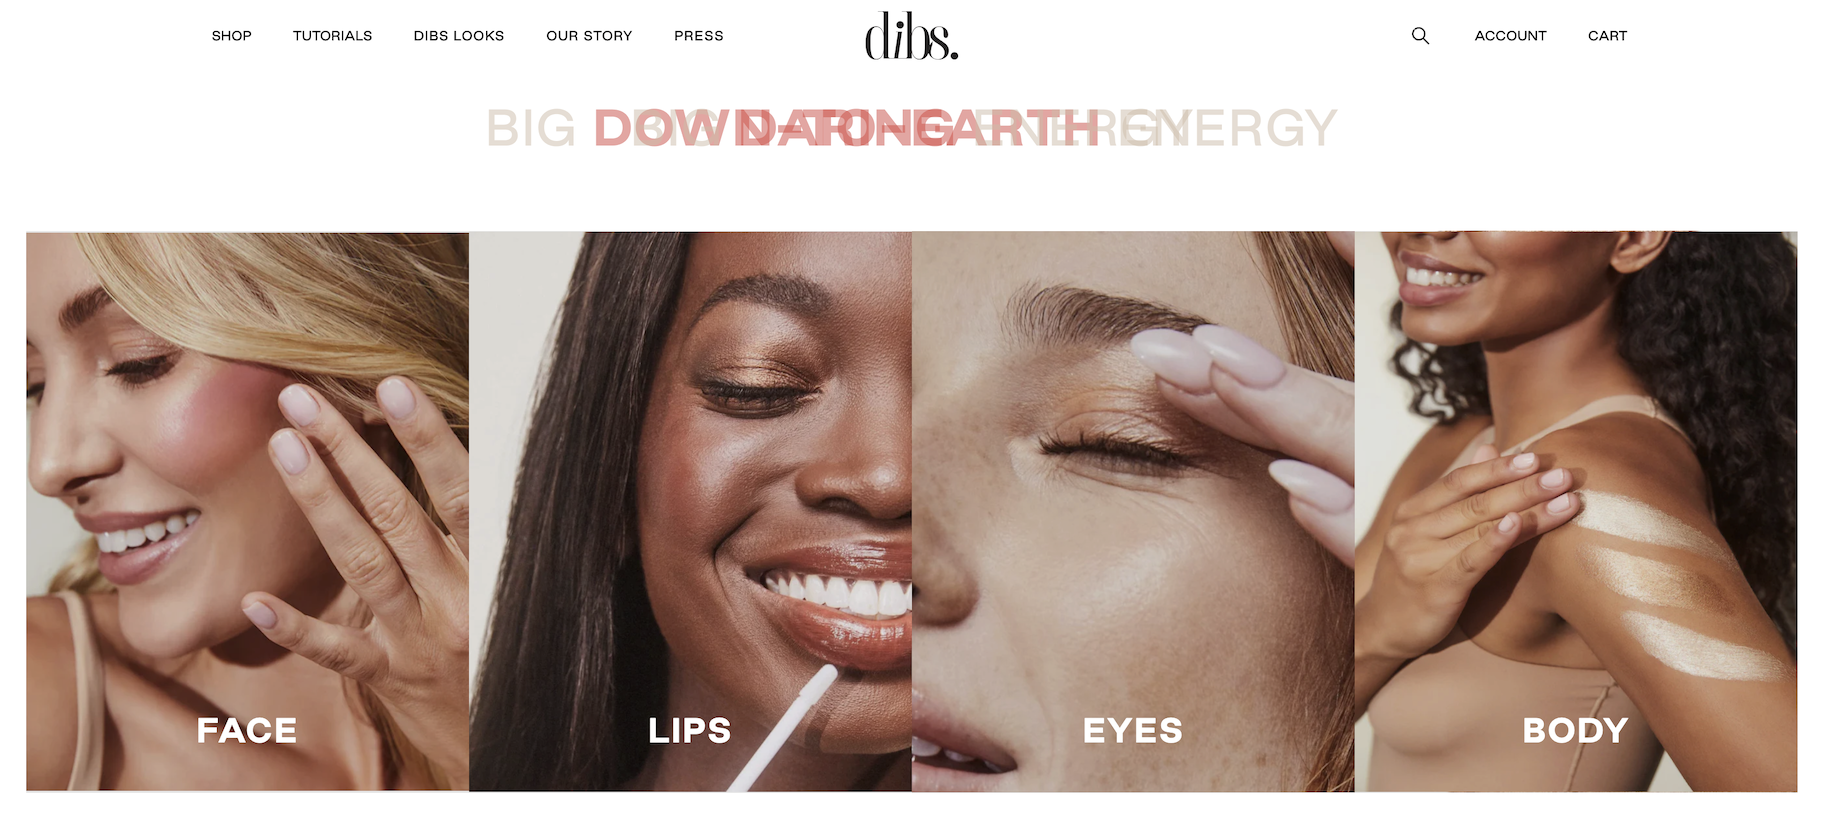 L Catterton Makes “Significant” Growth Investment in Emerging Beauty Brand Dibs Beauty